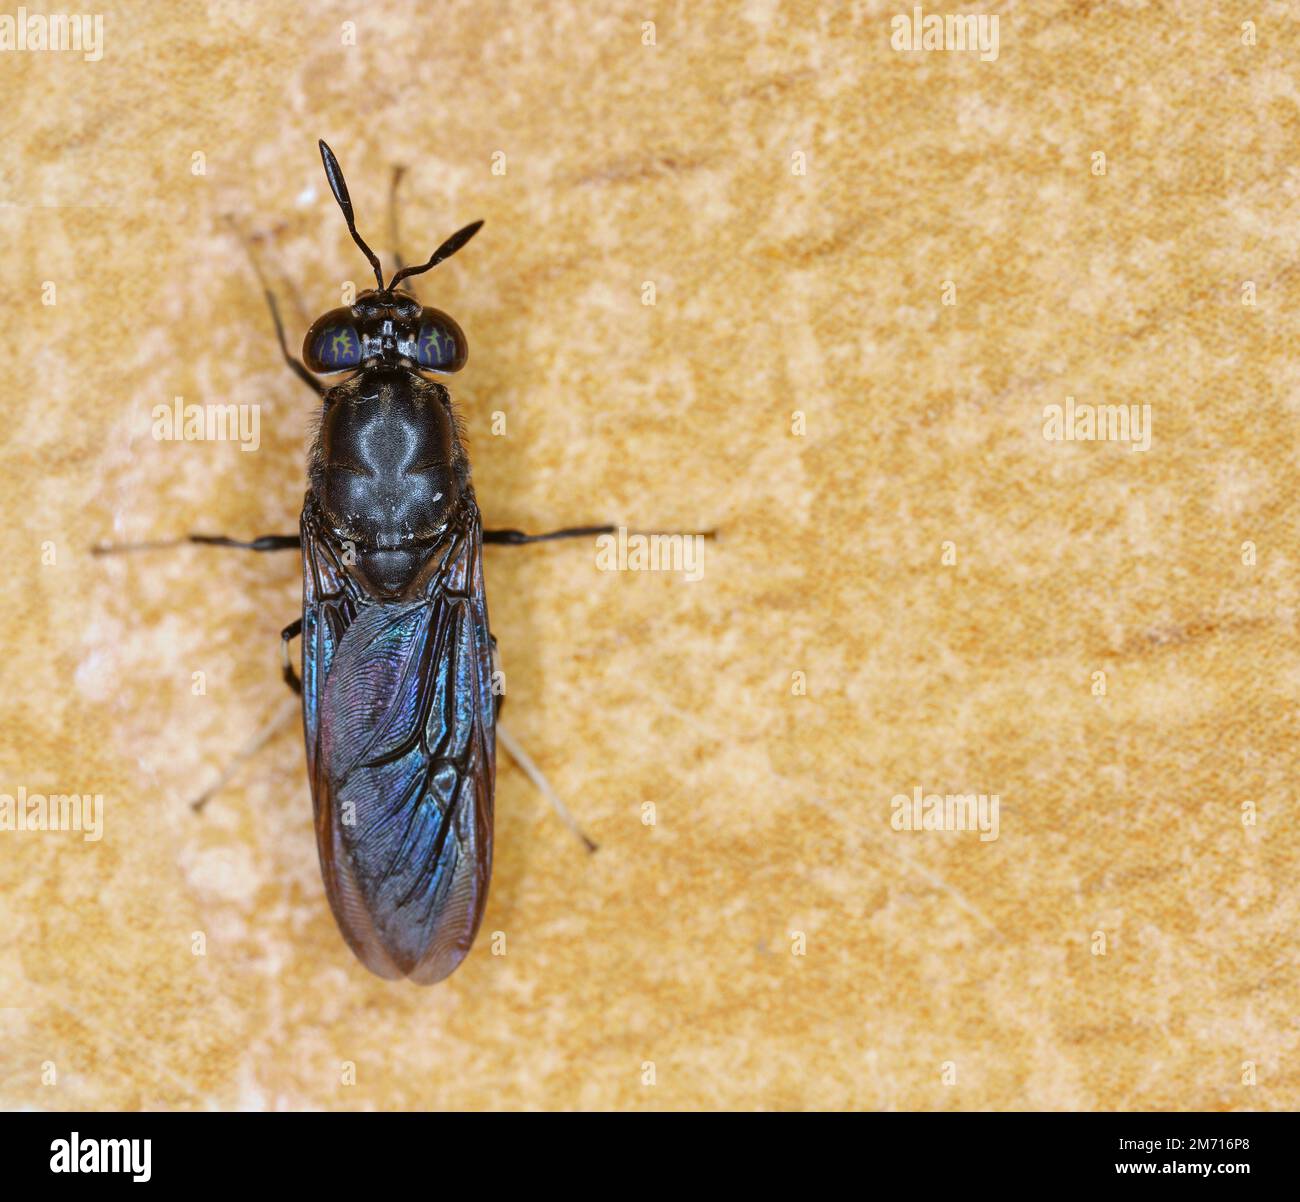 Black soldier fly species Hermetia illucens in high definition with extreme focus. Stock Photo